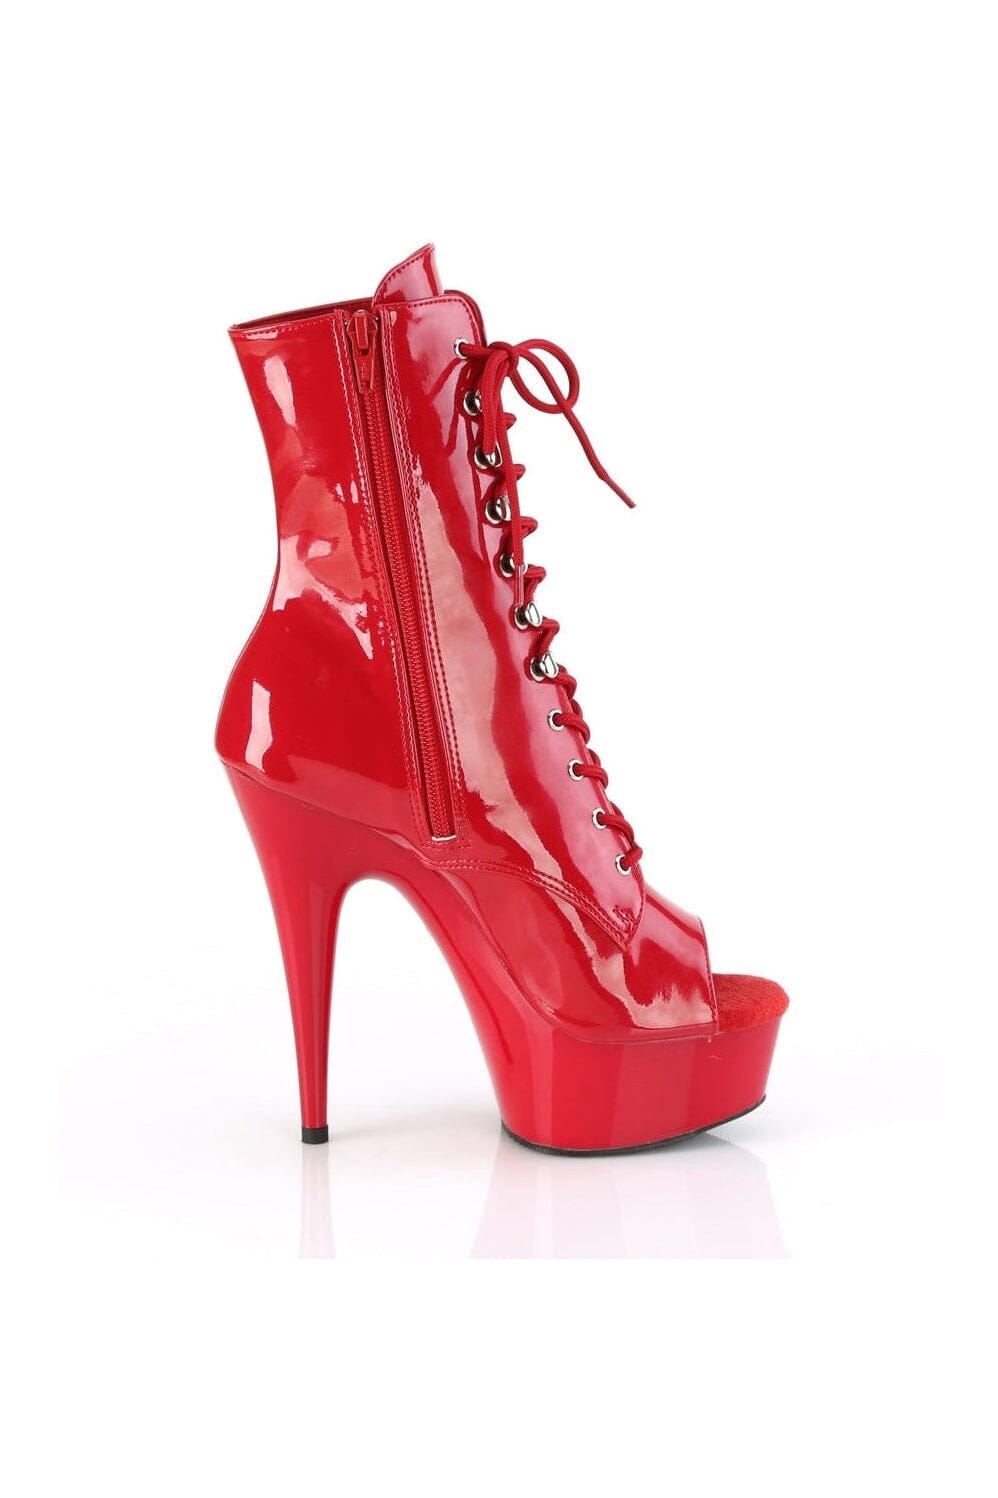 DELIGHT-1021 Red Patent Ankle Boot-Ankle Boots-Pleaser-SEXYSHOES.COM